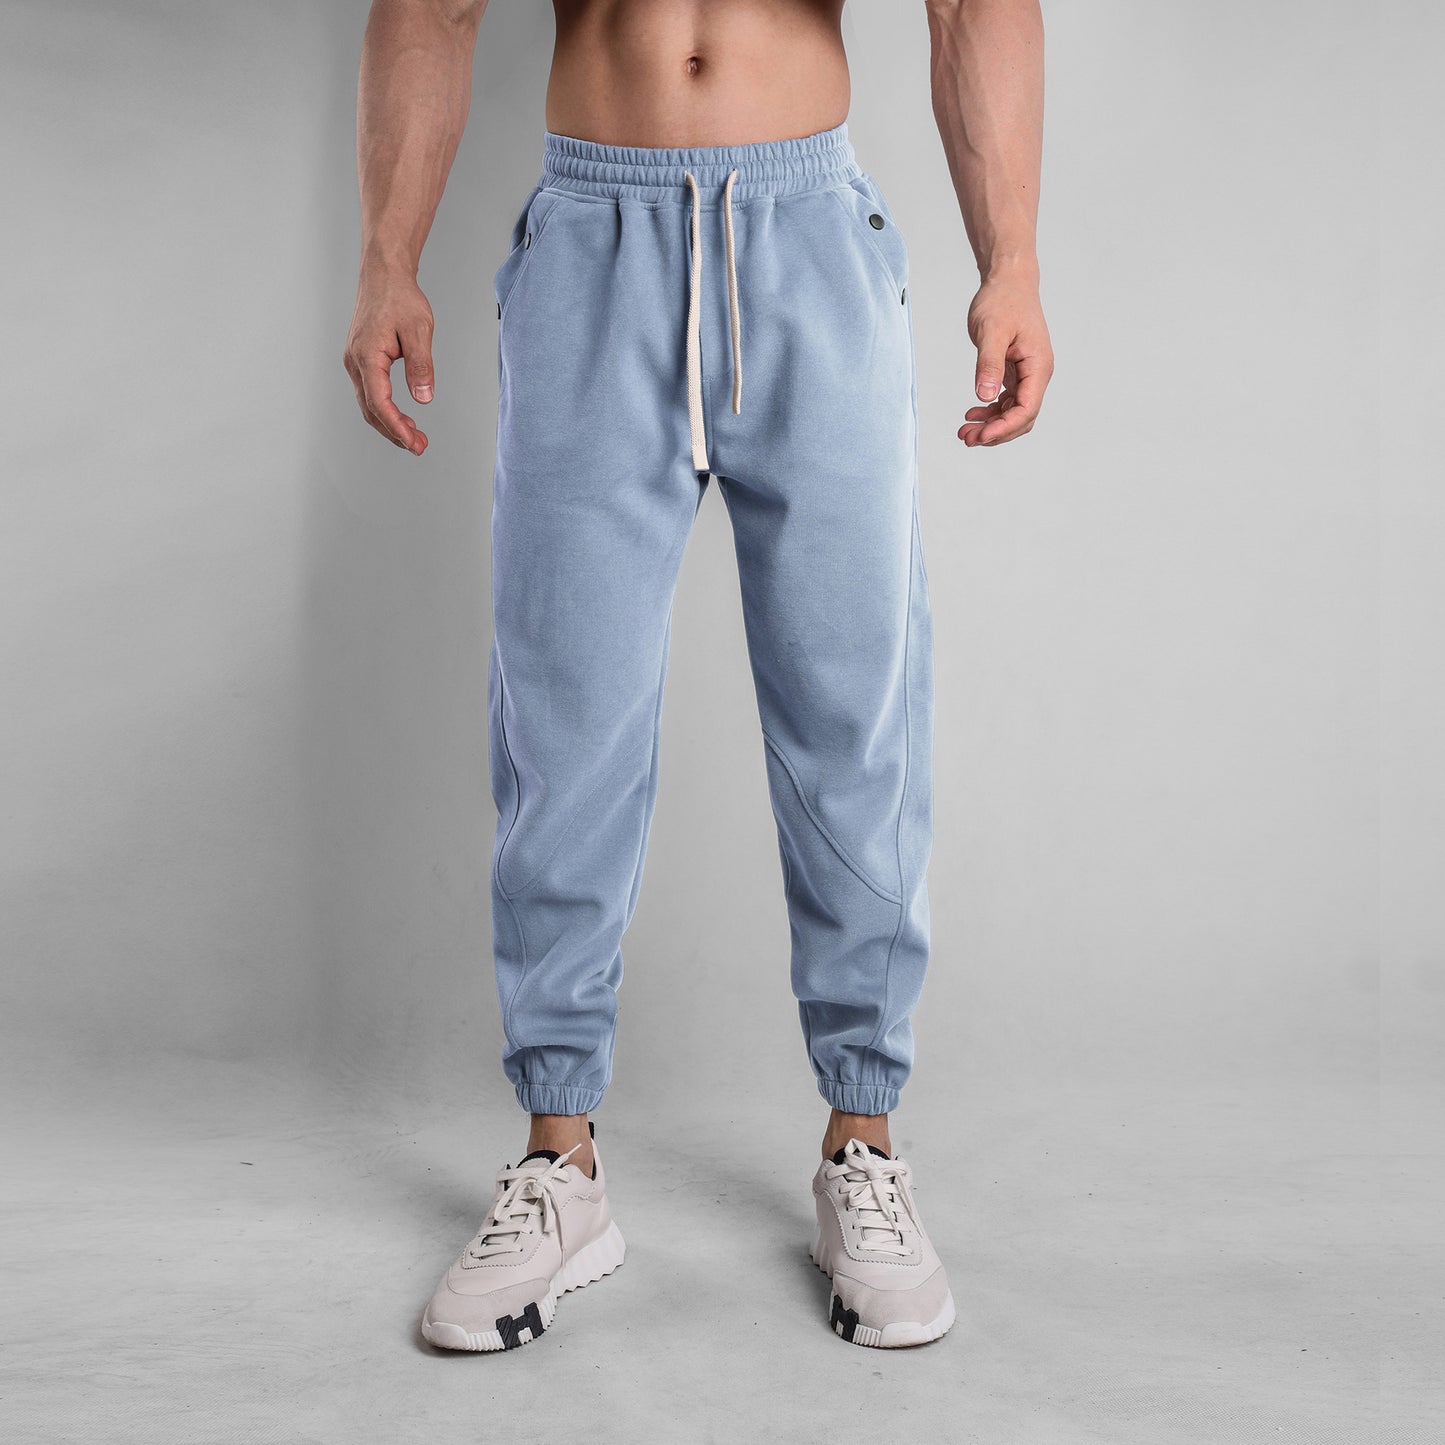 Wear sports pants men's fashion loose running fitness pants Chinese cotton compound breathable sports training new style